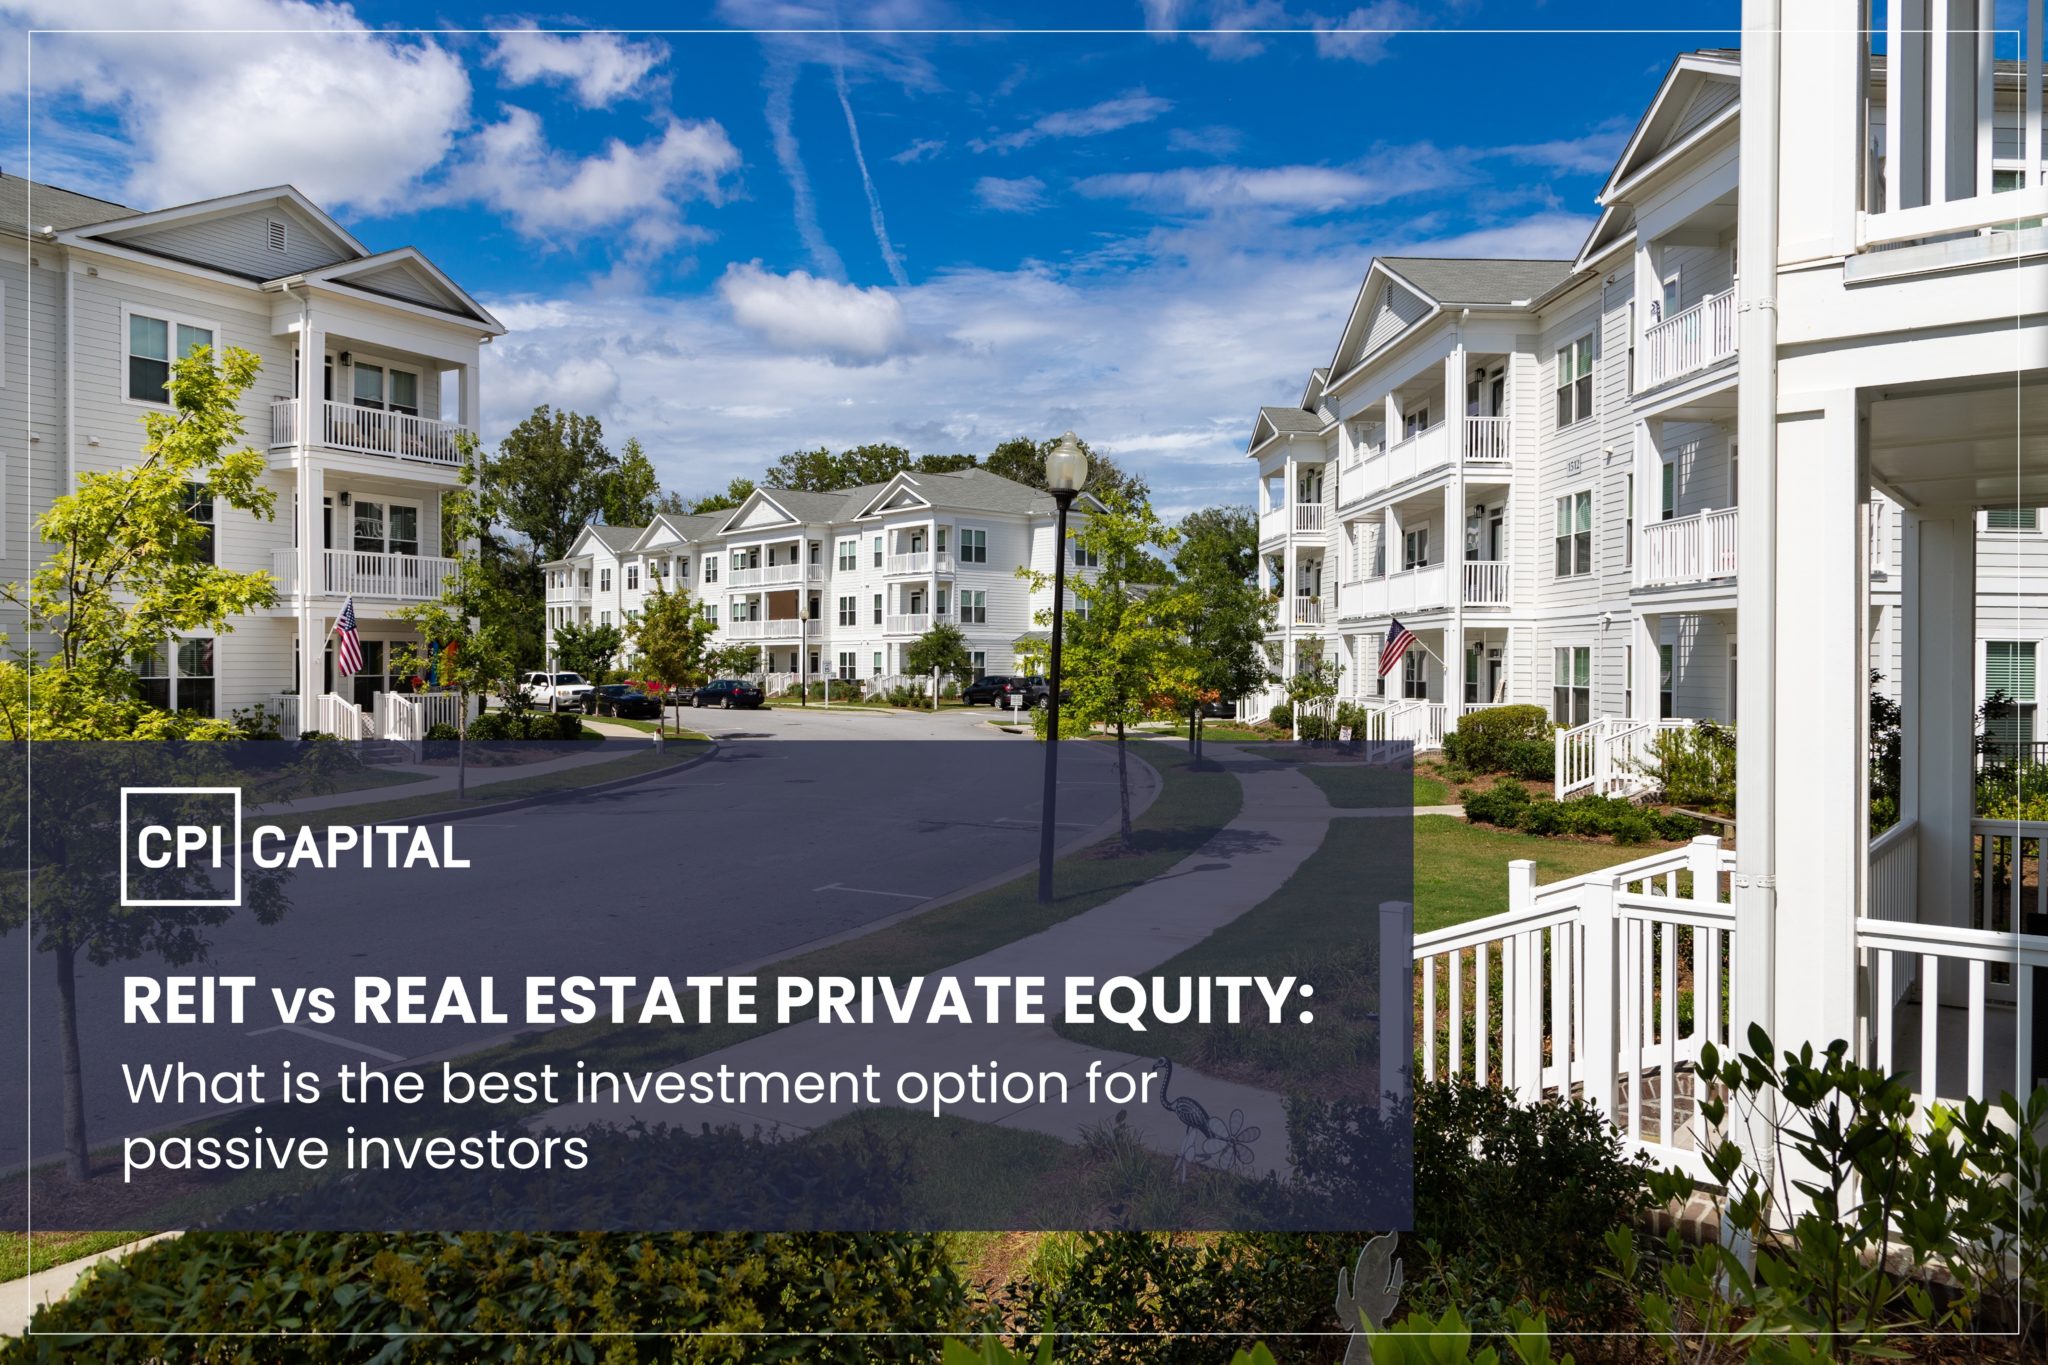 REIT vs Real Estate Private Equity: What is the best investment model for passive investors?